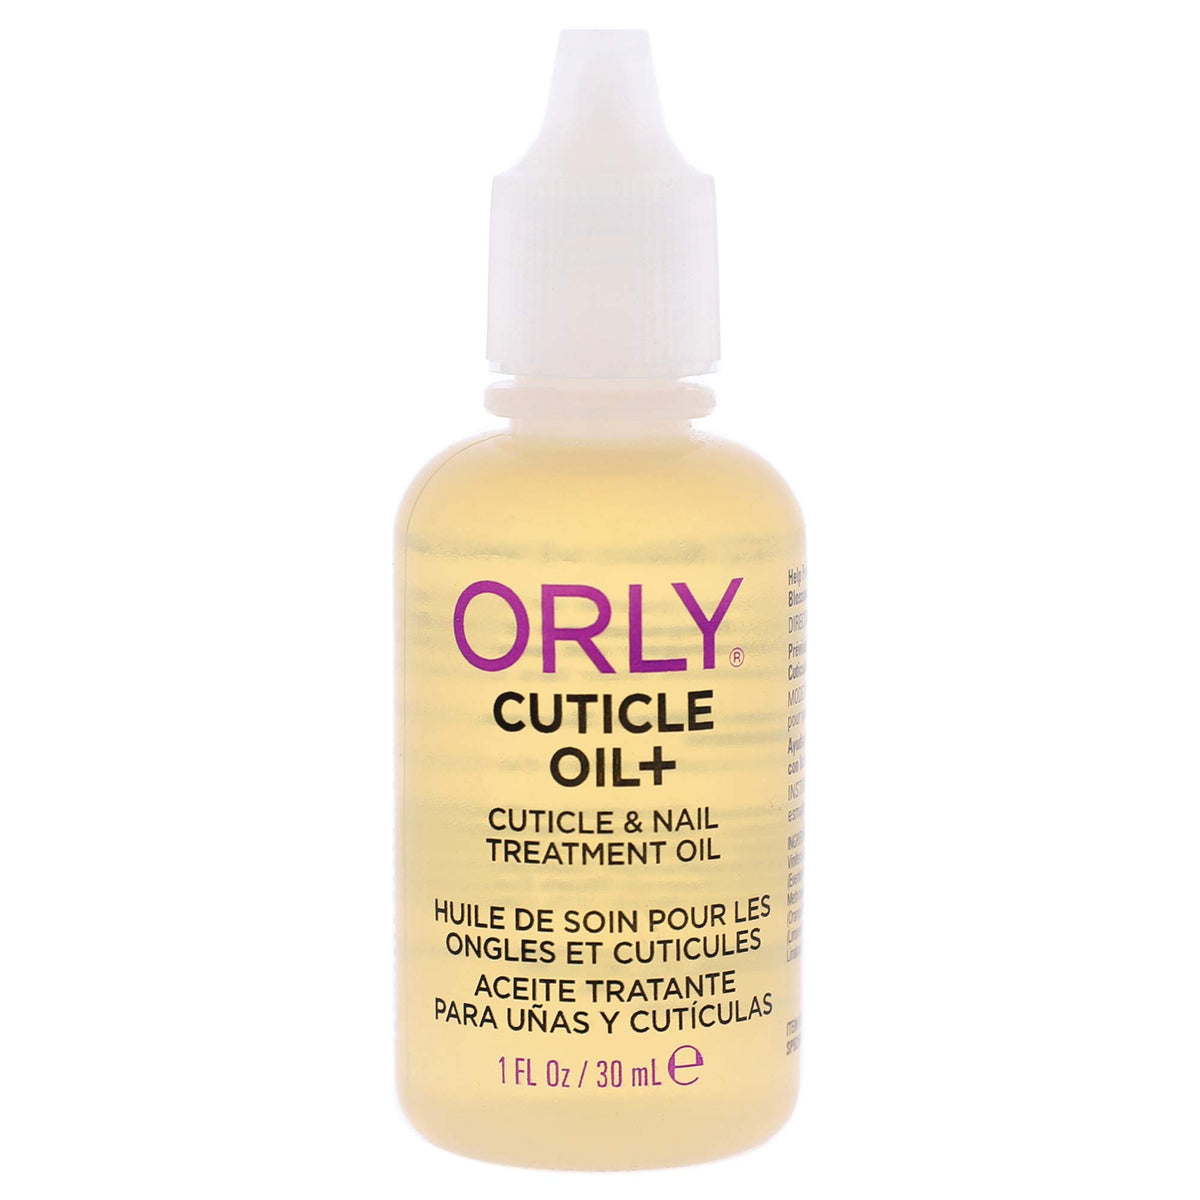 Orly Cuticle Oil,30 ml.